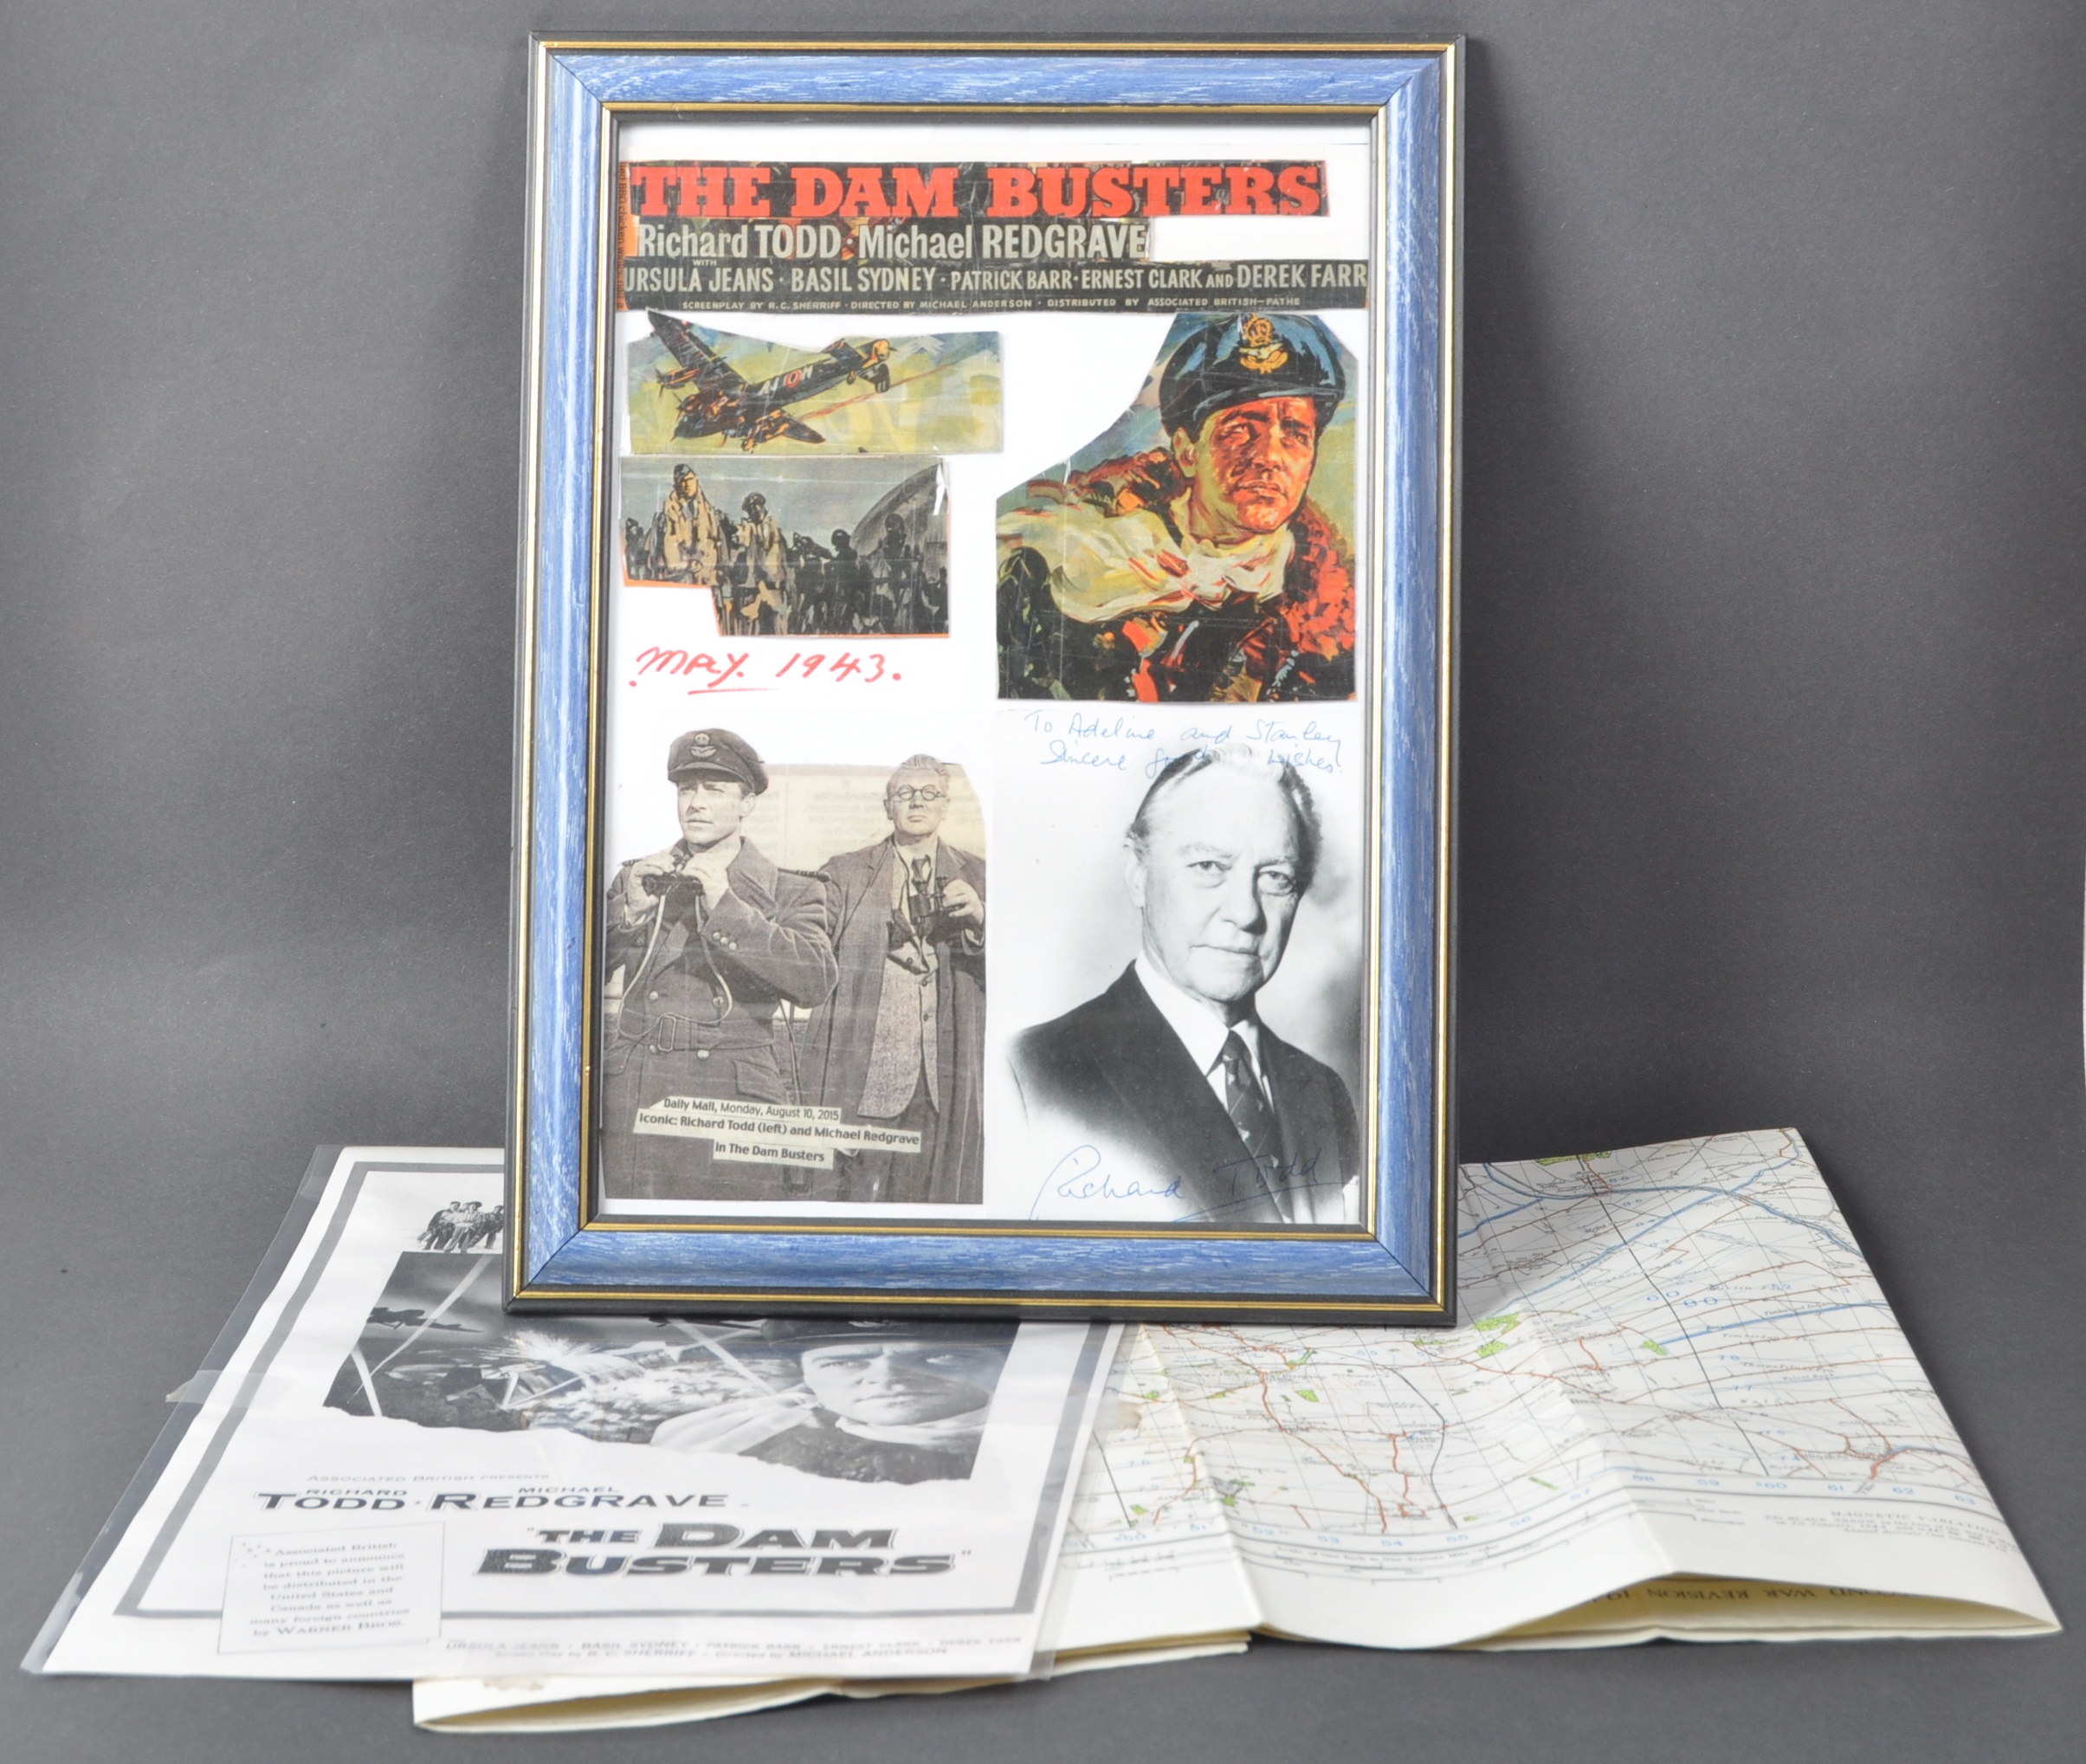 THE DAM BUSTERS (1955 FILM) - COLLECTION OF MEMORABILIA